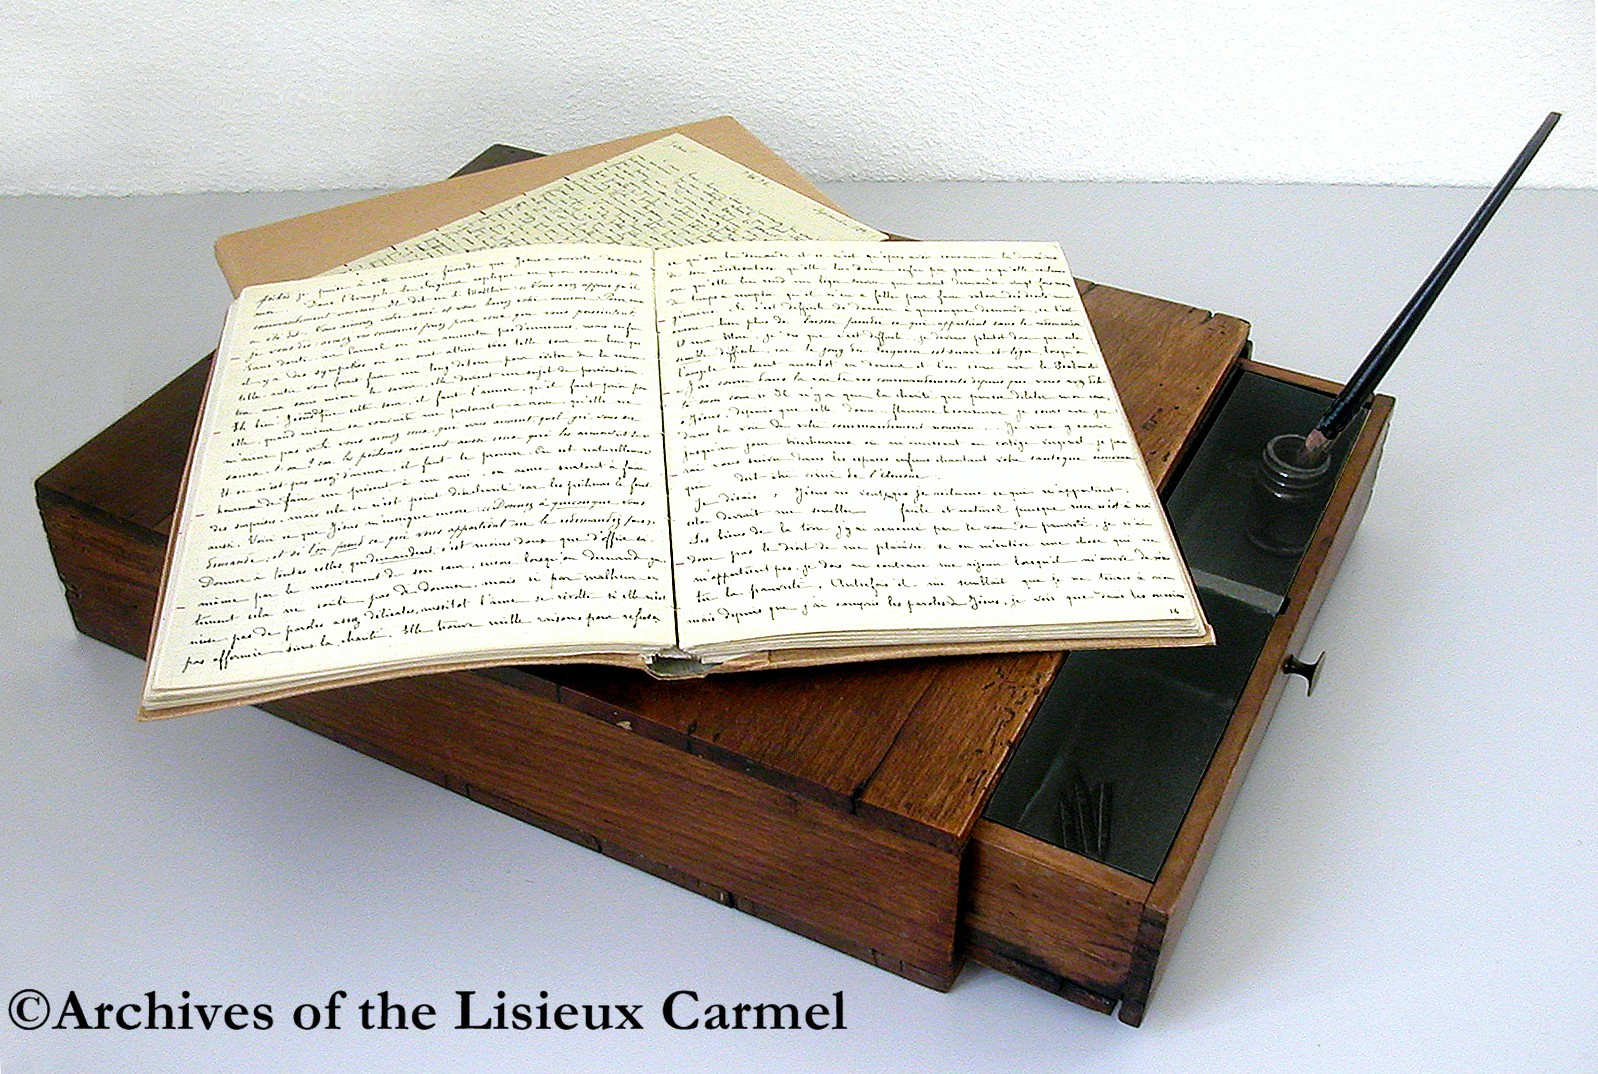 color photo of small wooden writing-desk (a lap desk) on which Therese wrote her manuscripts.  Manuscripts open on top.  An open drawer shows pen, inkstand, and spare nibs